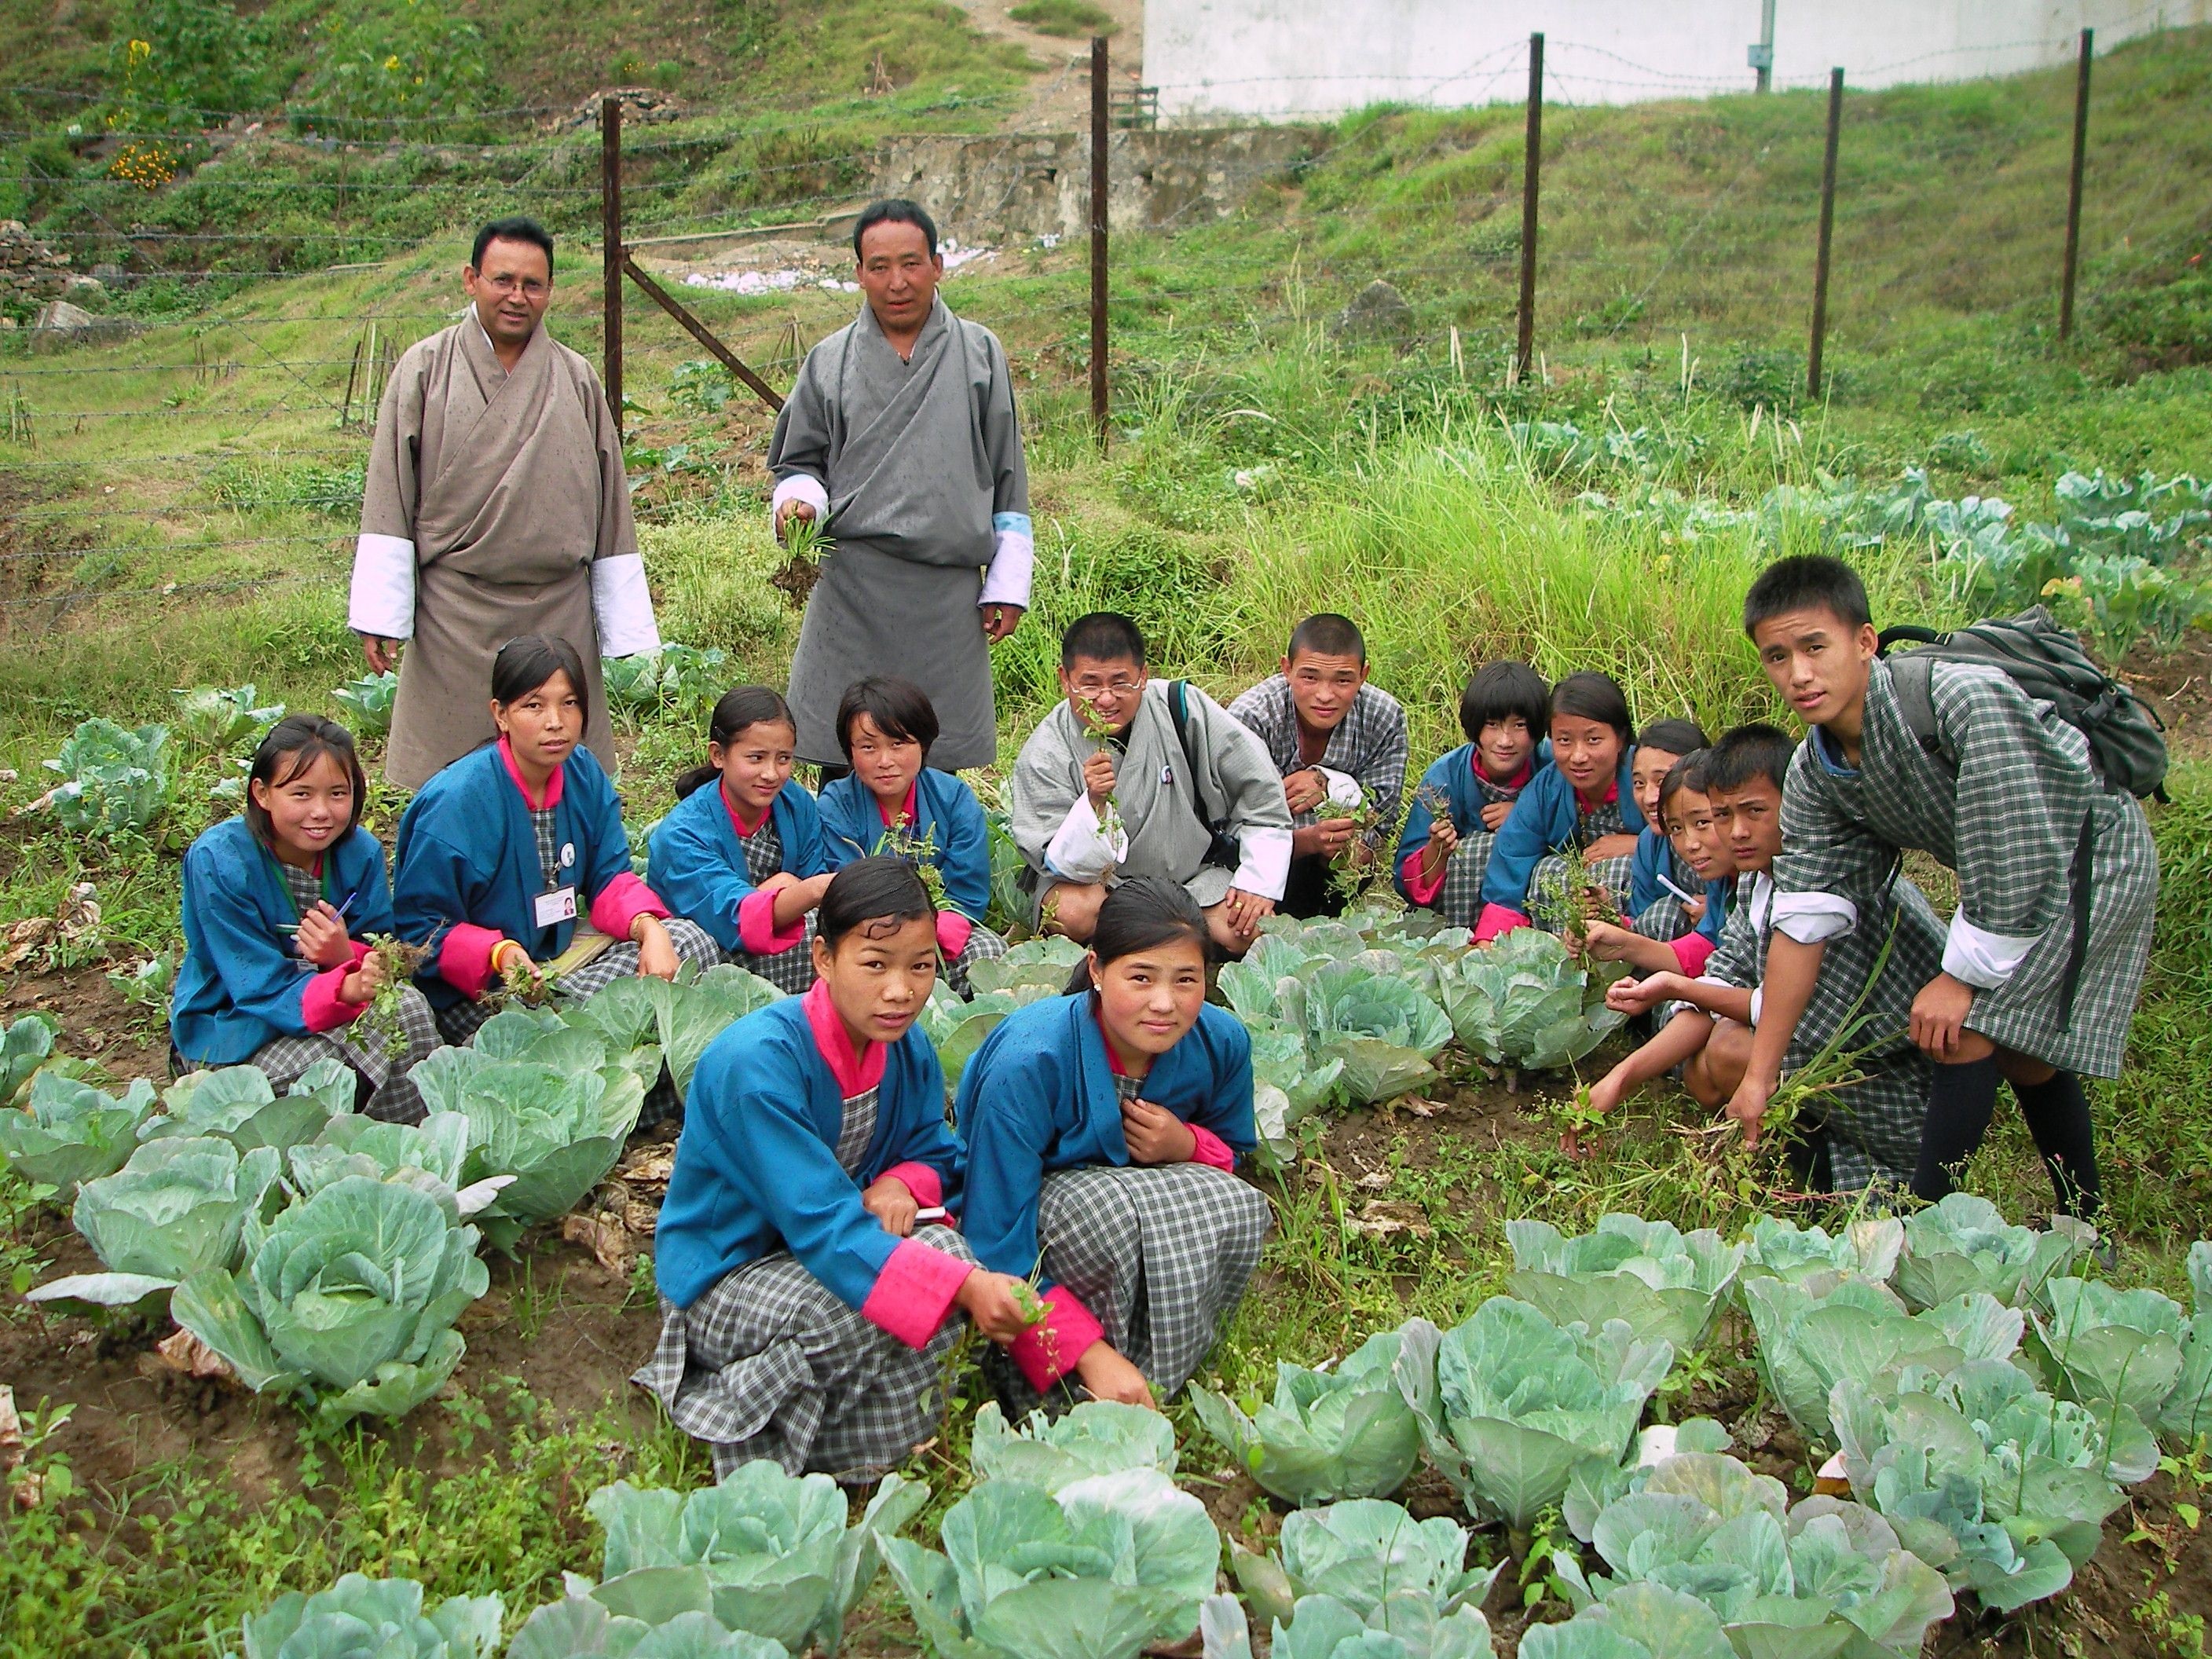 New video: Agriculture Program at School in Bhutan -sustainable farming with EM-